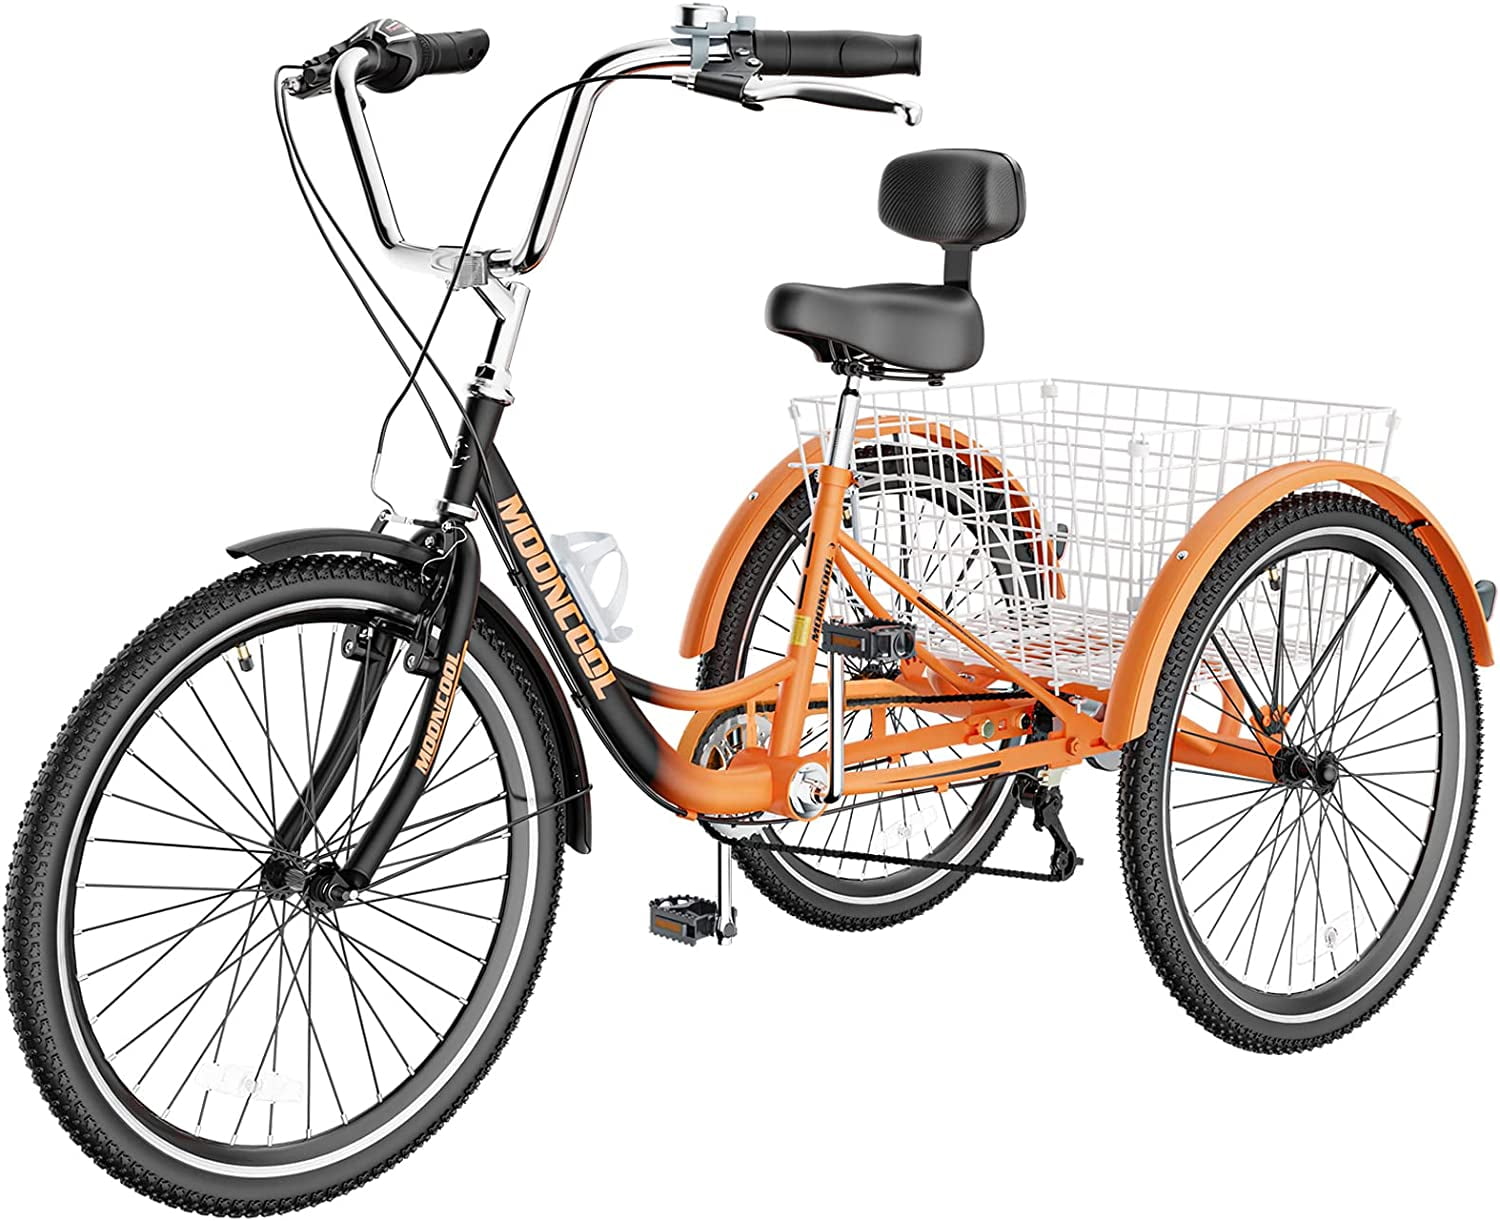 Adult Tricycles, 7 Speed Adult Trikes 24/26 inch 3 Wheel Bikes, Cruise Bike  with Basket for Seniors, Women, Men for Recreation, Shopping, Exercise